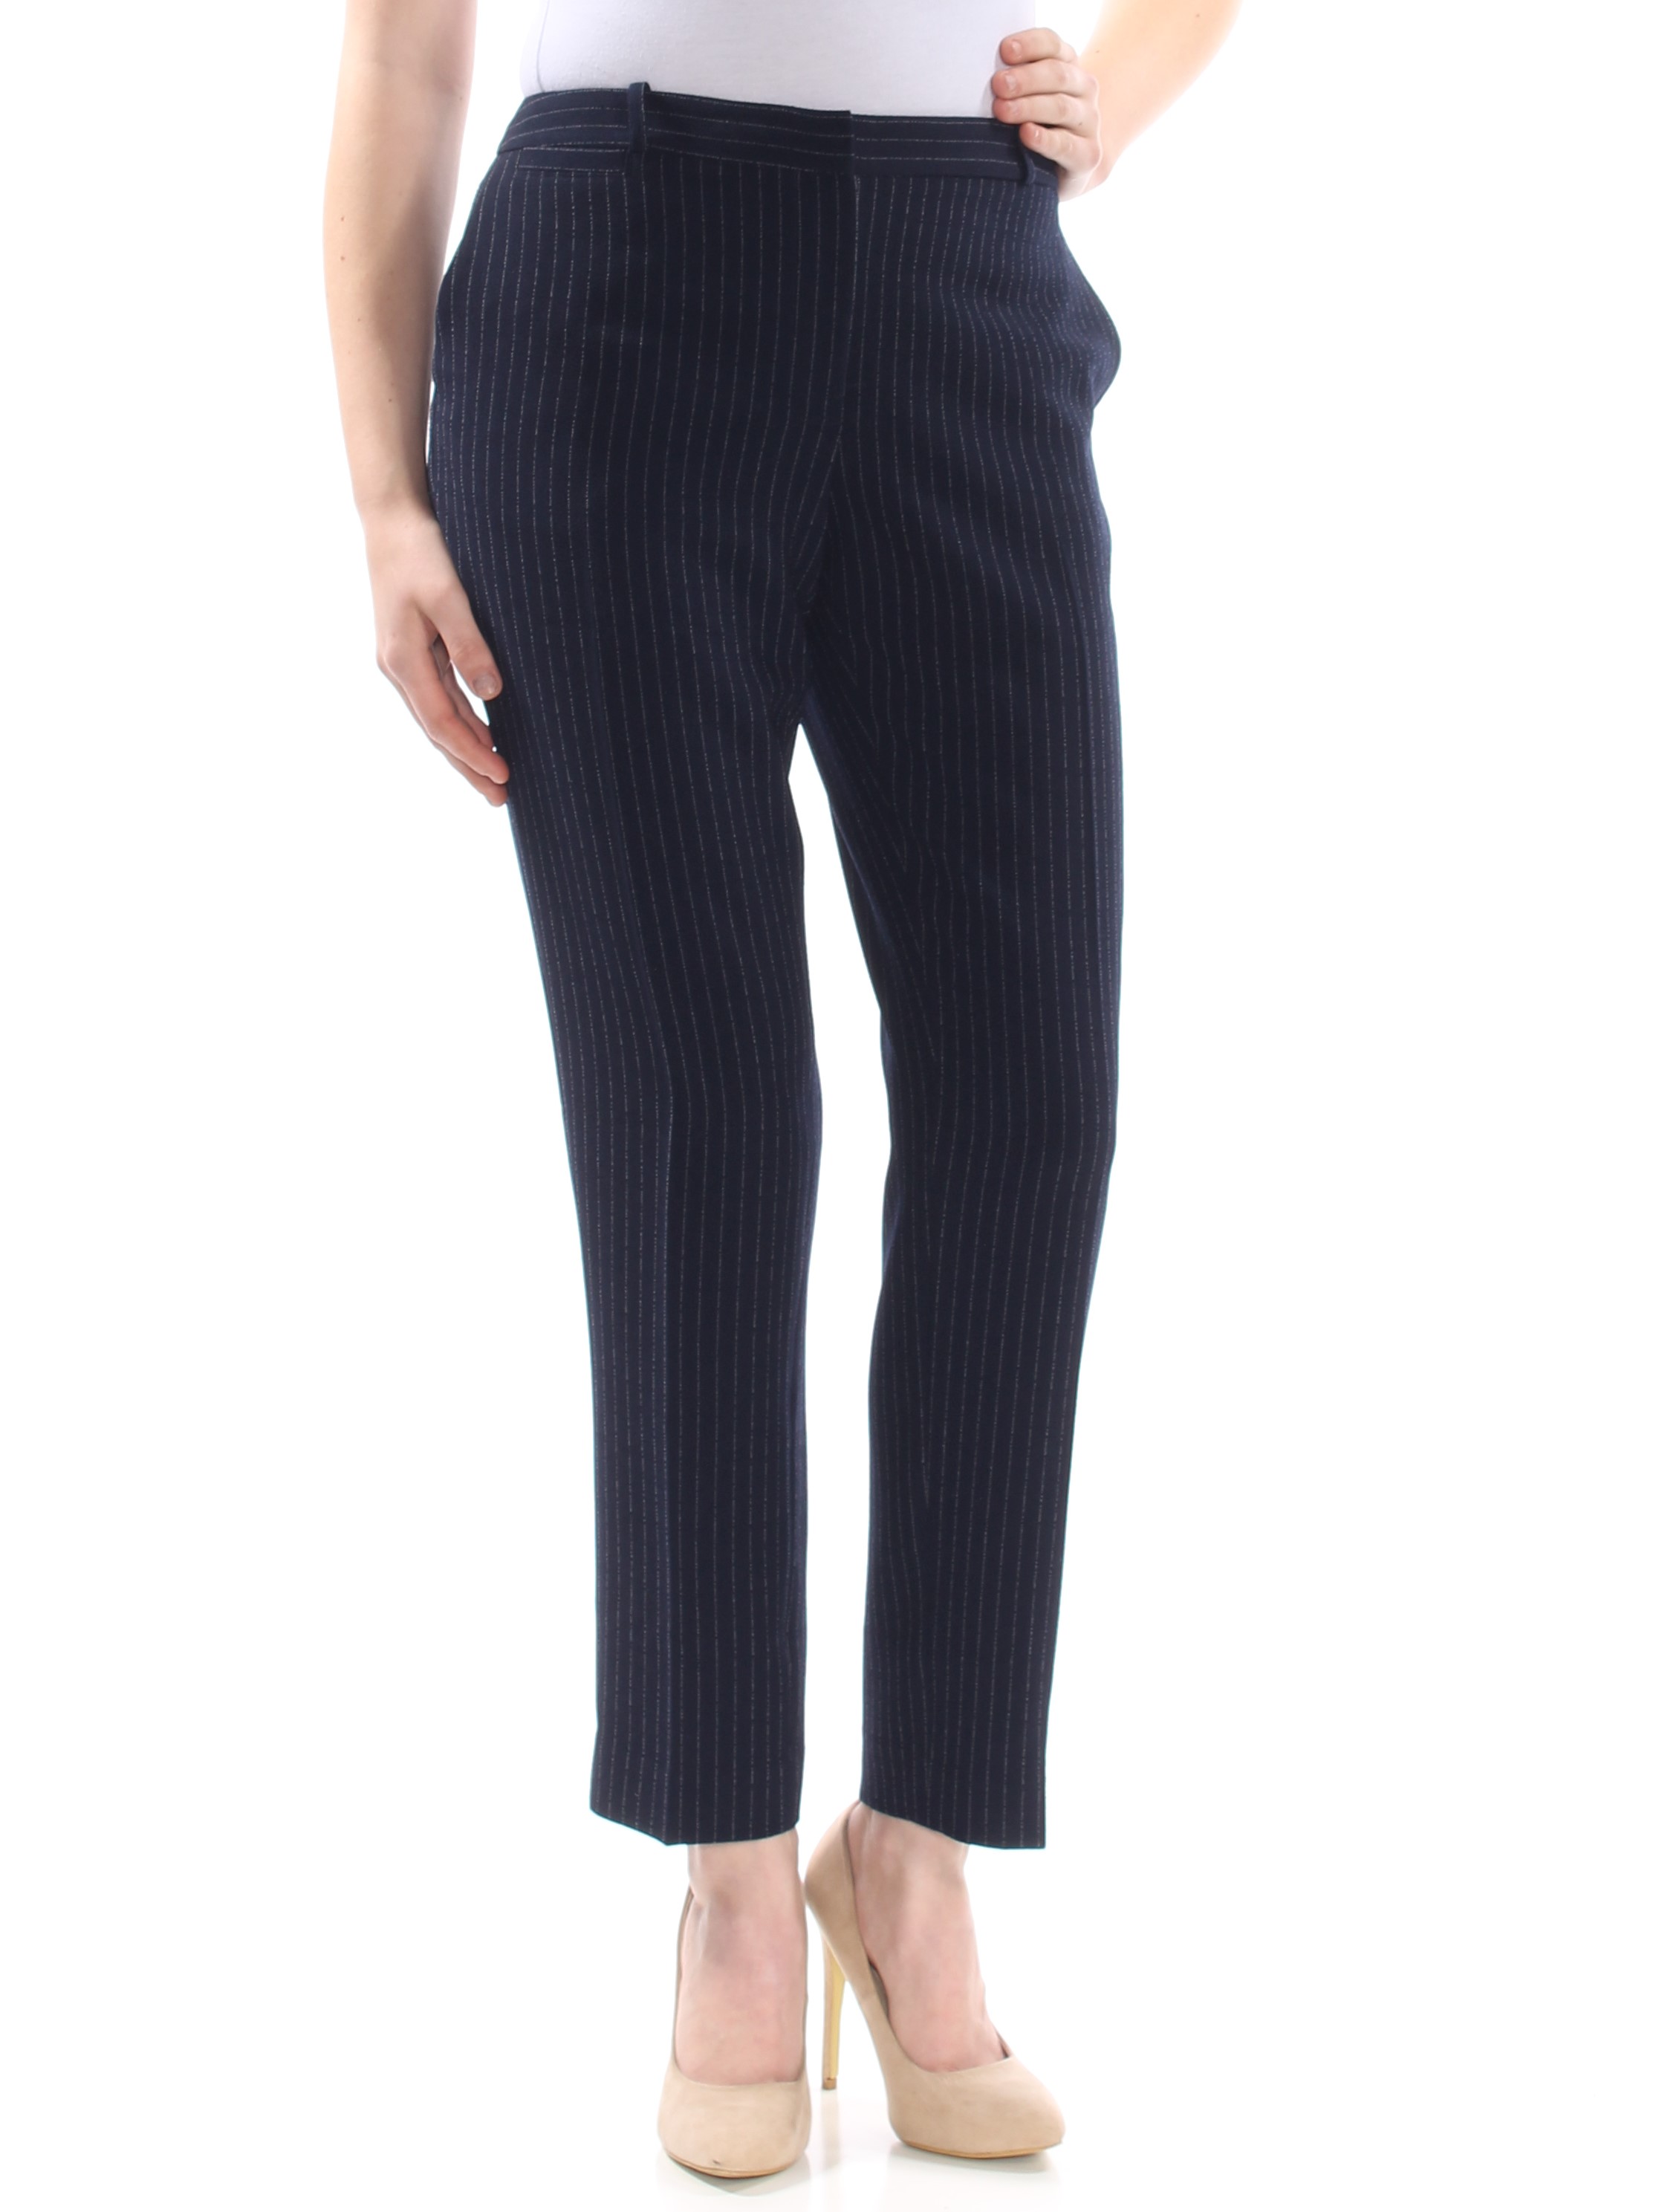 TOMMY HILFIGER $89 Womens New Navy Pinstripe Pocketed Hidden Closure Pants 8 B+B - image 1 of 2